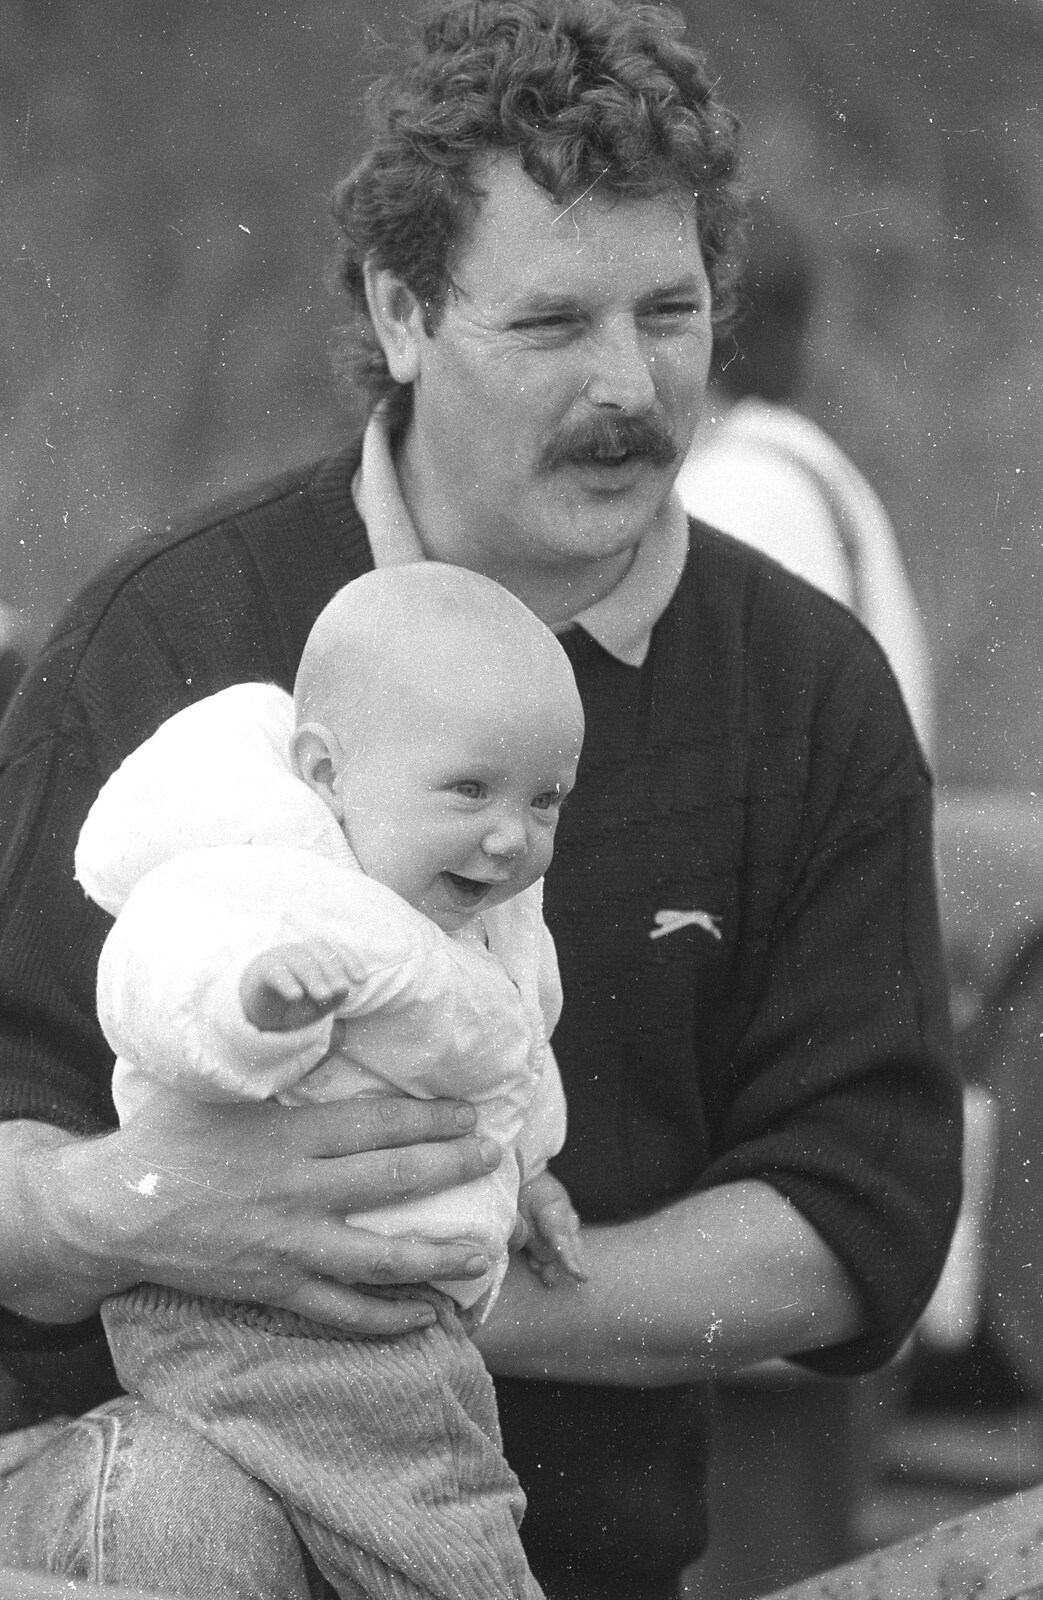 Keith and baby from Cider Making in Black and White, Stuston, Suffolk - 11th October 1992